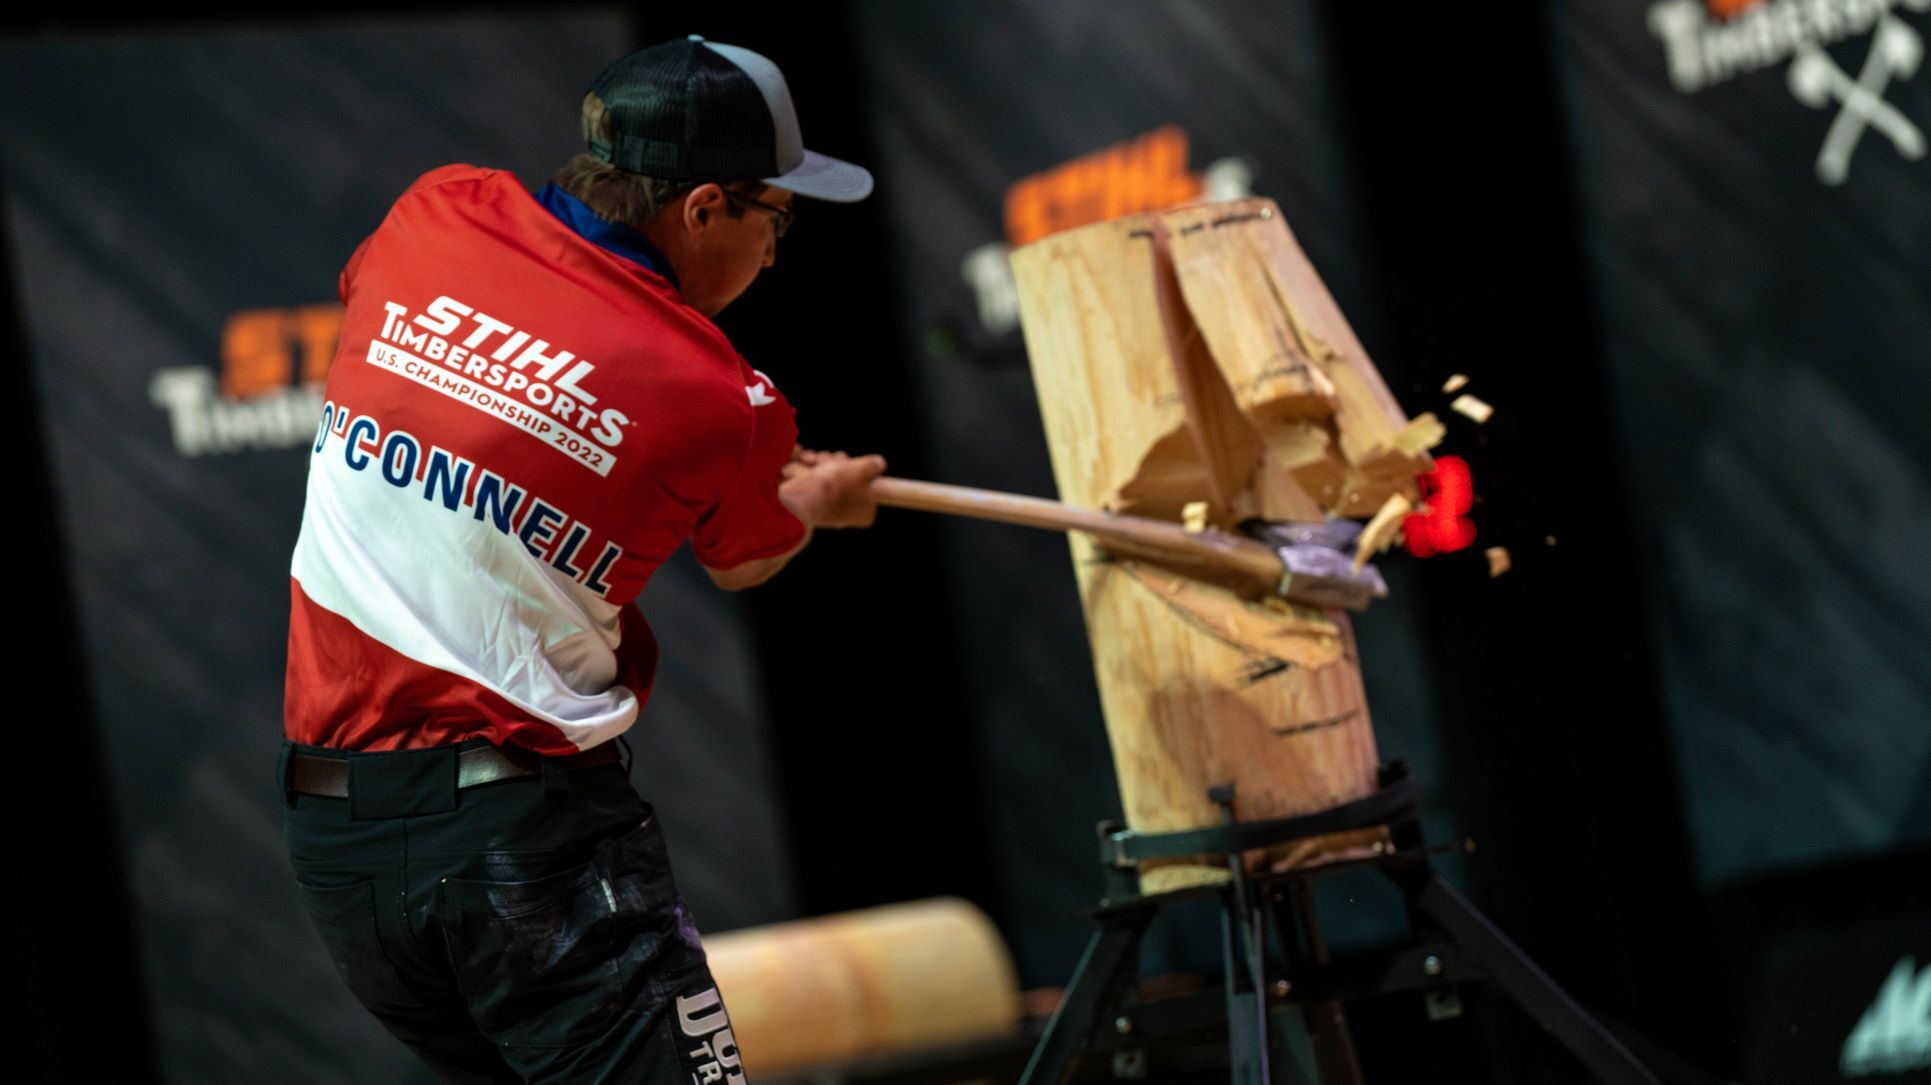 Alumnus Andrew O’Connell at the Men’s US STIHL® Rookie Championships, where he set a national rookie record and is now Sweden-bound for the STIHL® Rookie World Championships next year. 